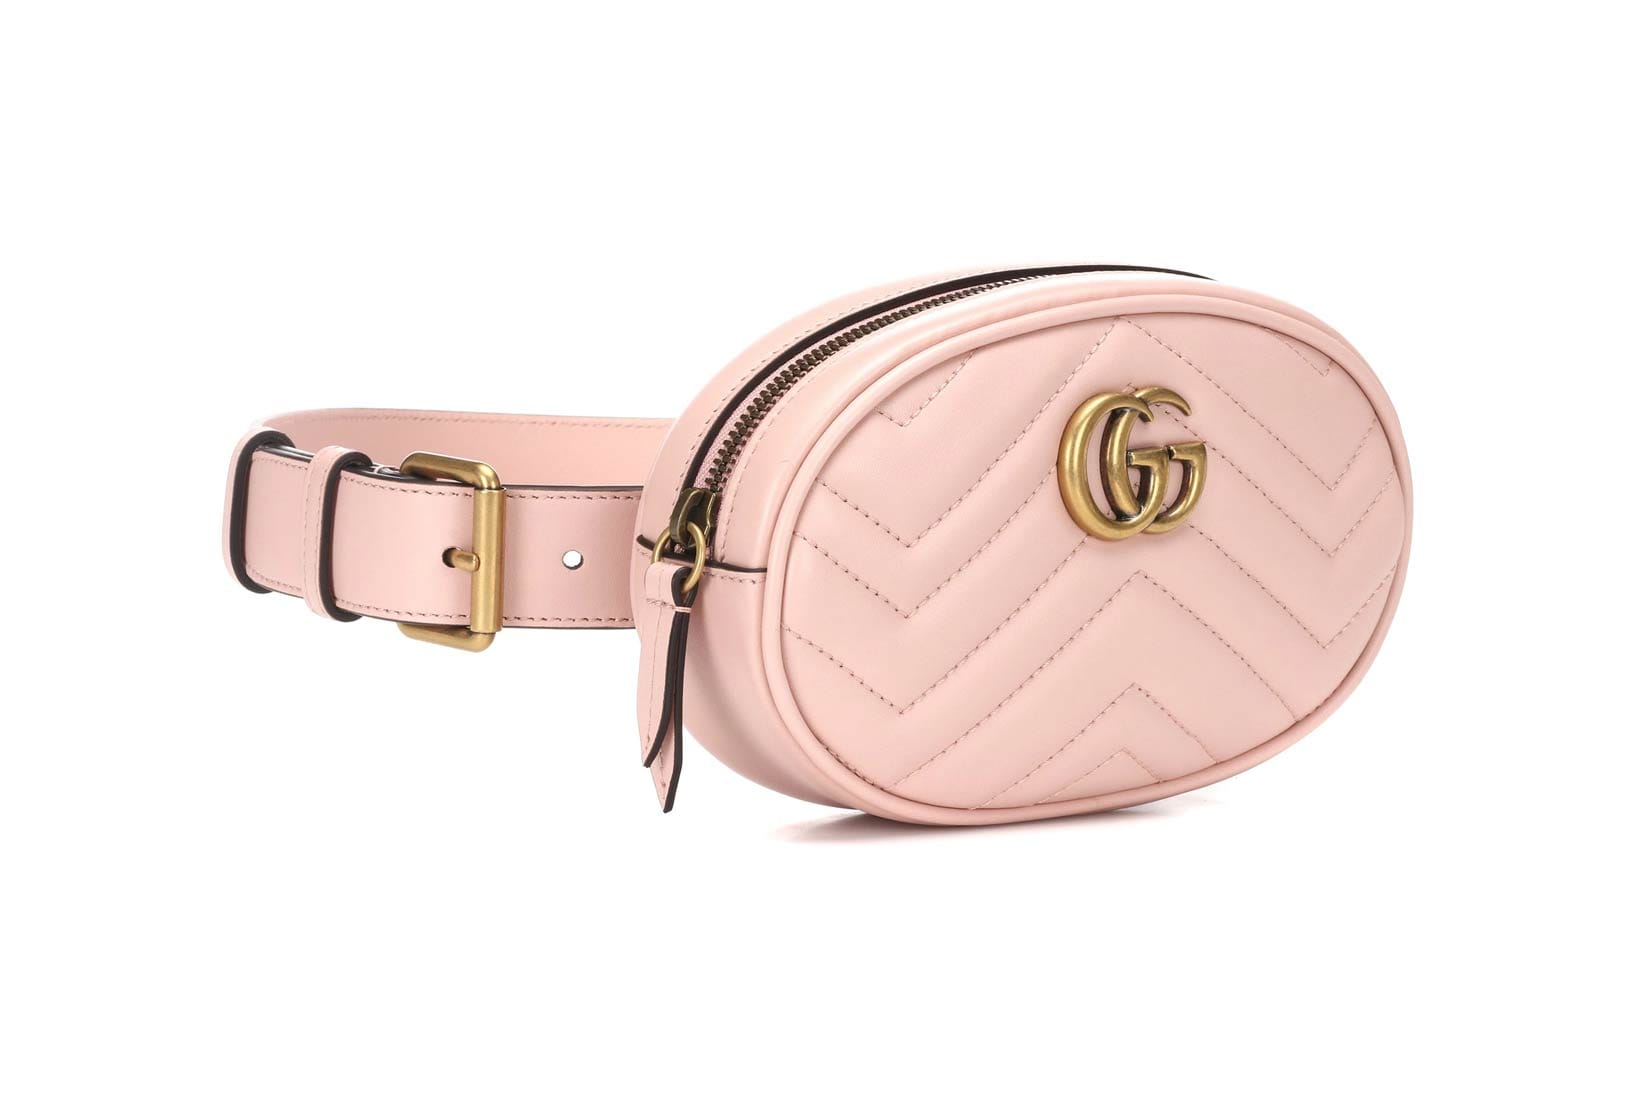 Gucci GG Marmont Leather Belt Bag 